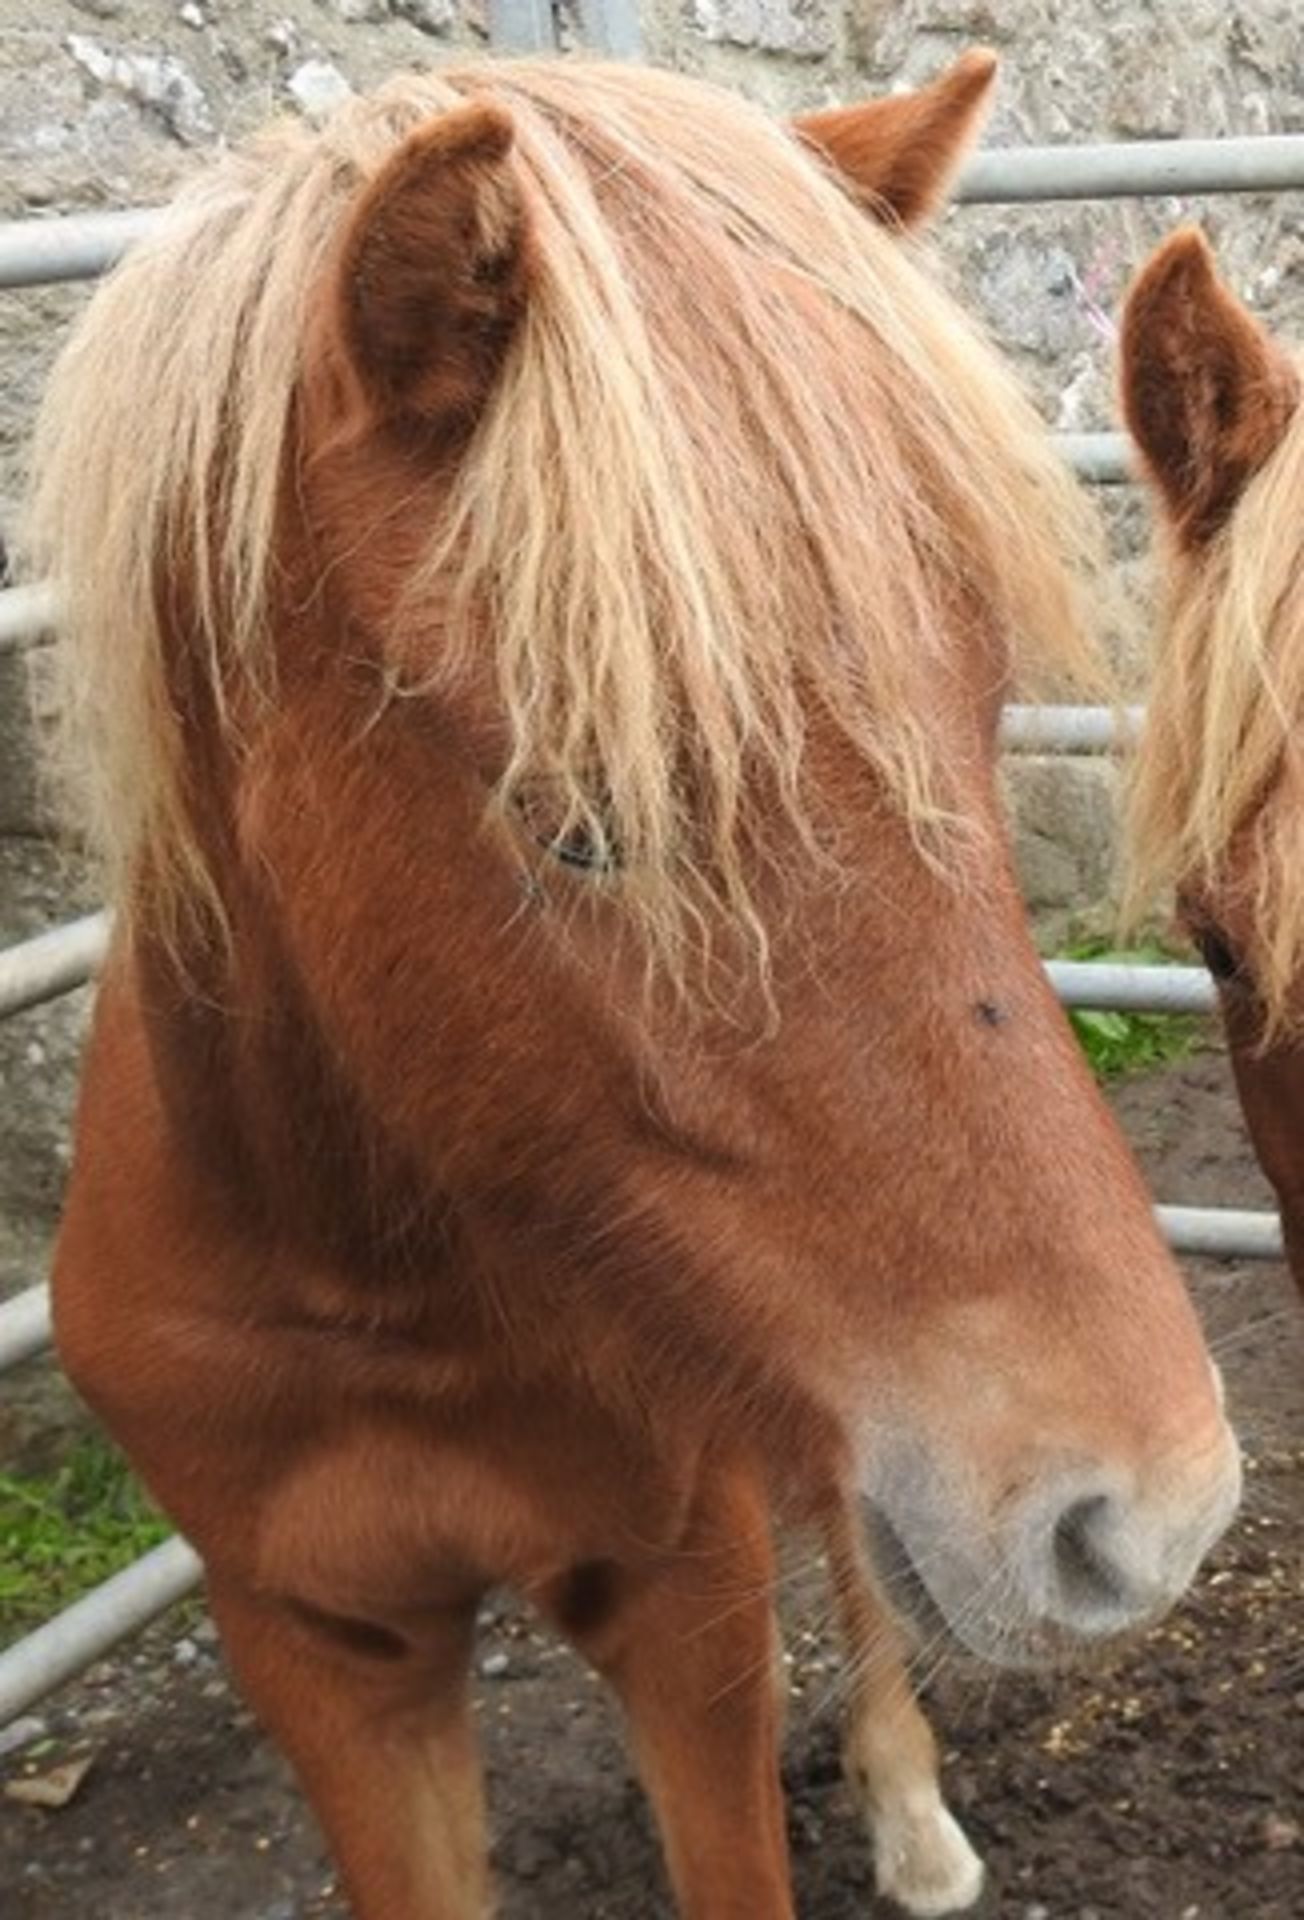 'CATOR HONEY' DARTMOOR HILL PONY CHESTNUT FILLY APPROX 18 MONTHS OLD